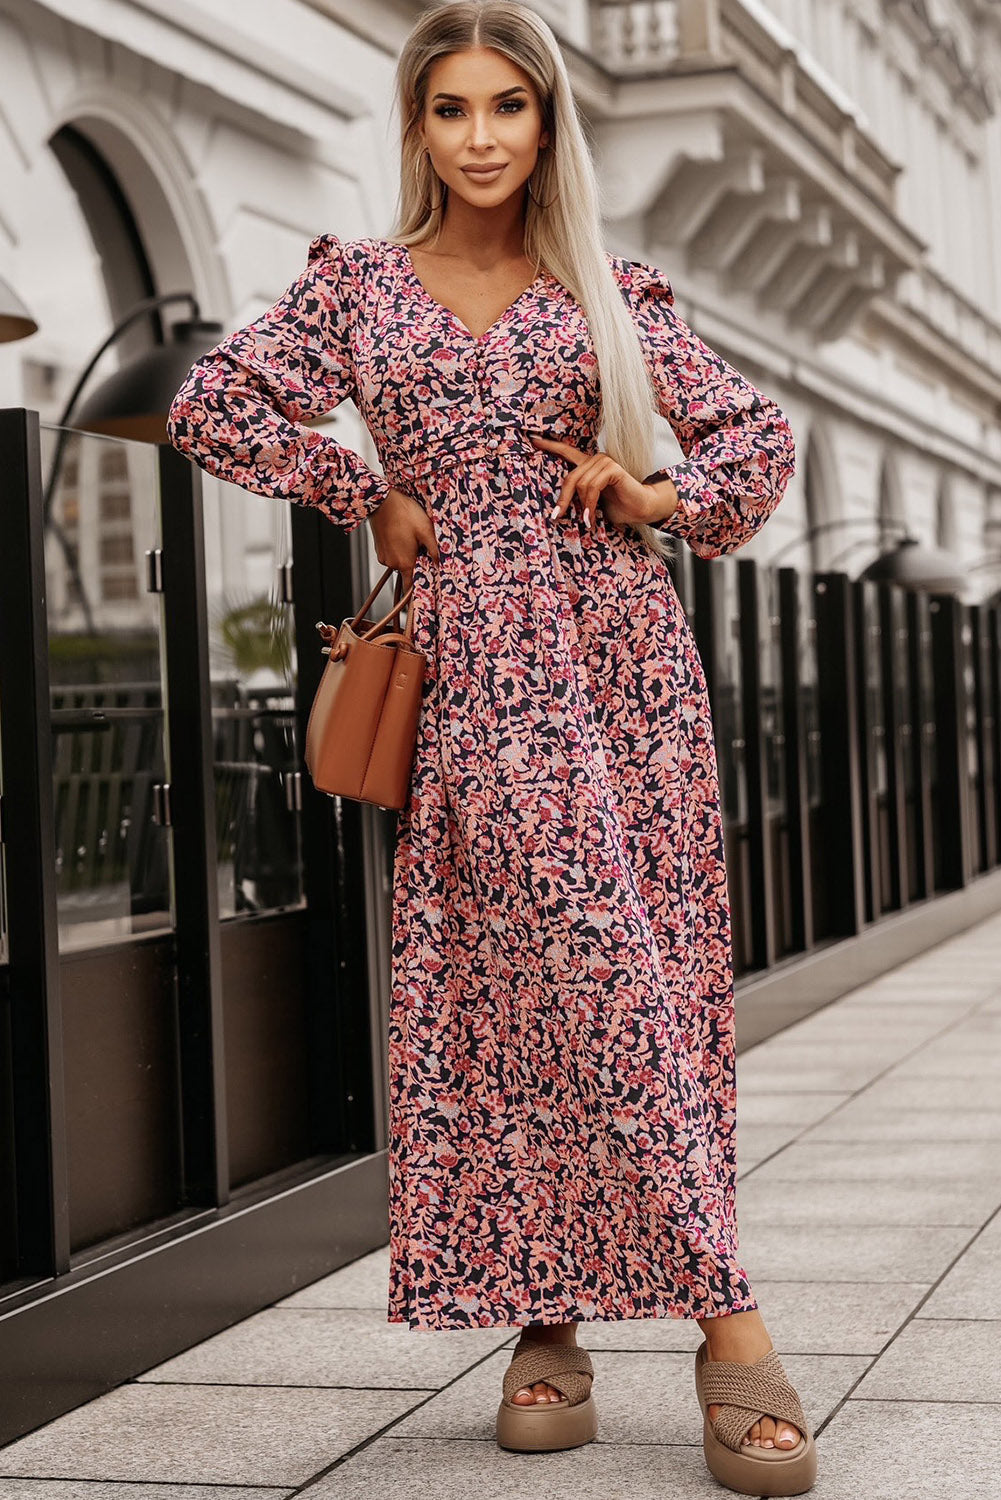 Printed V-Neck Long Sleeve Maxi Dress - Online Only